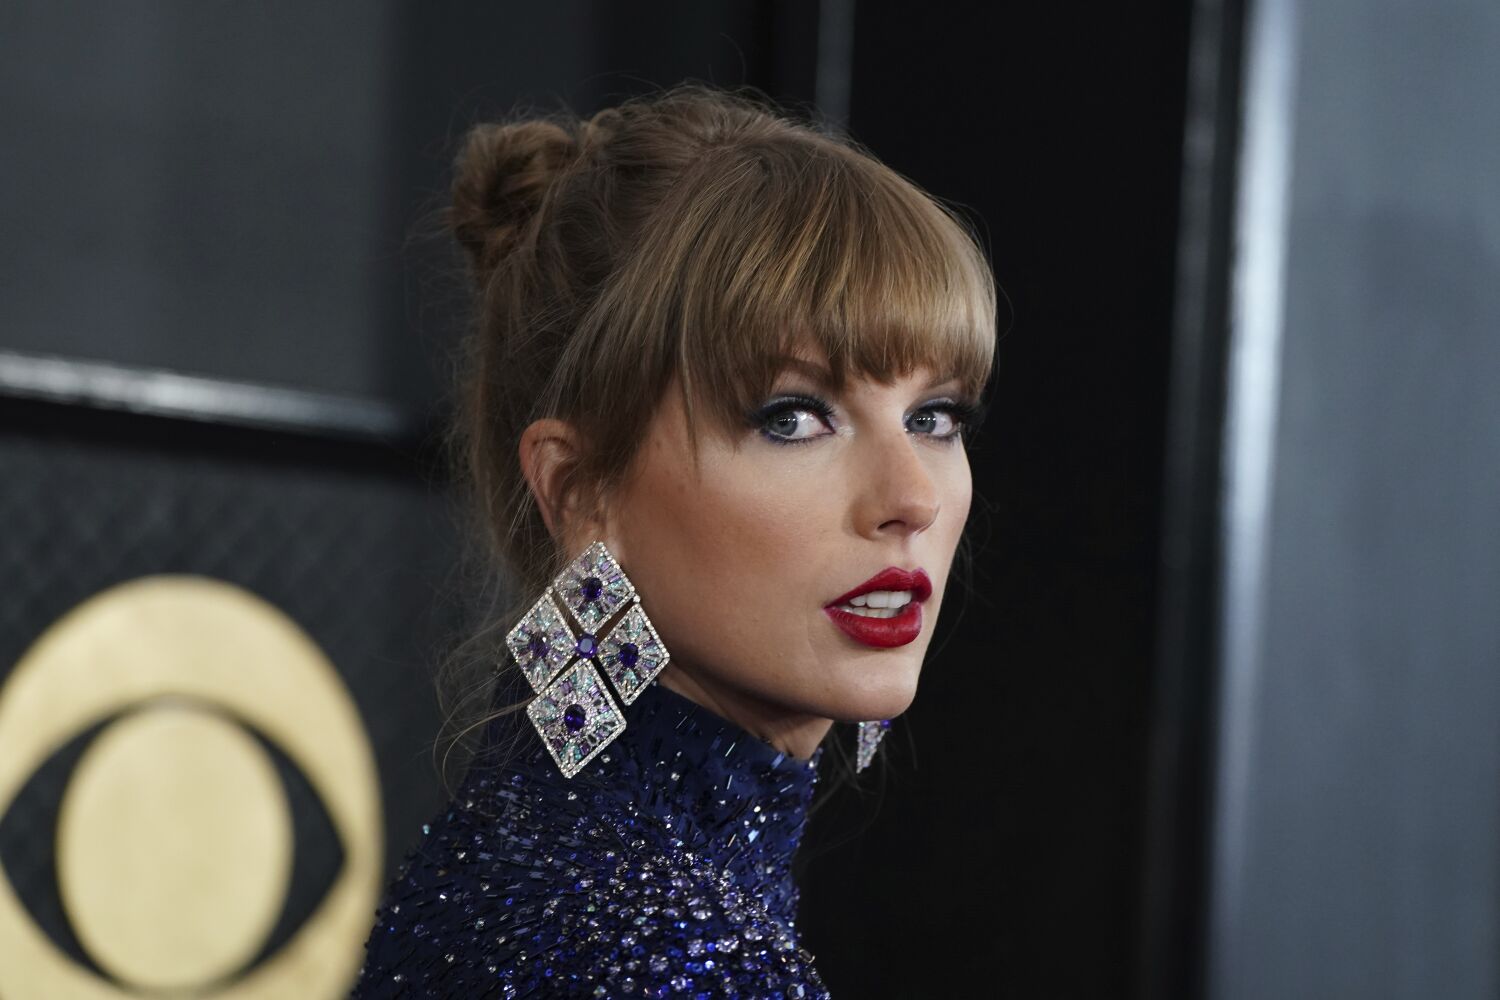 Stanford will offer student-led class on Taylor Swift's storytelling 'through the eras'